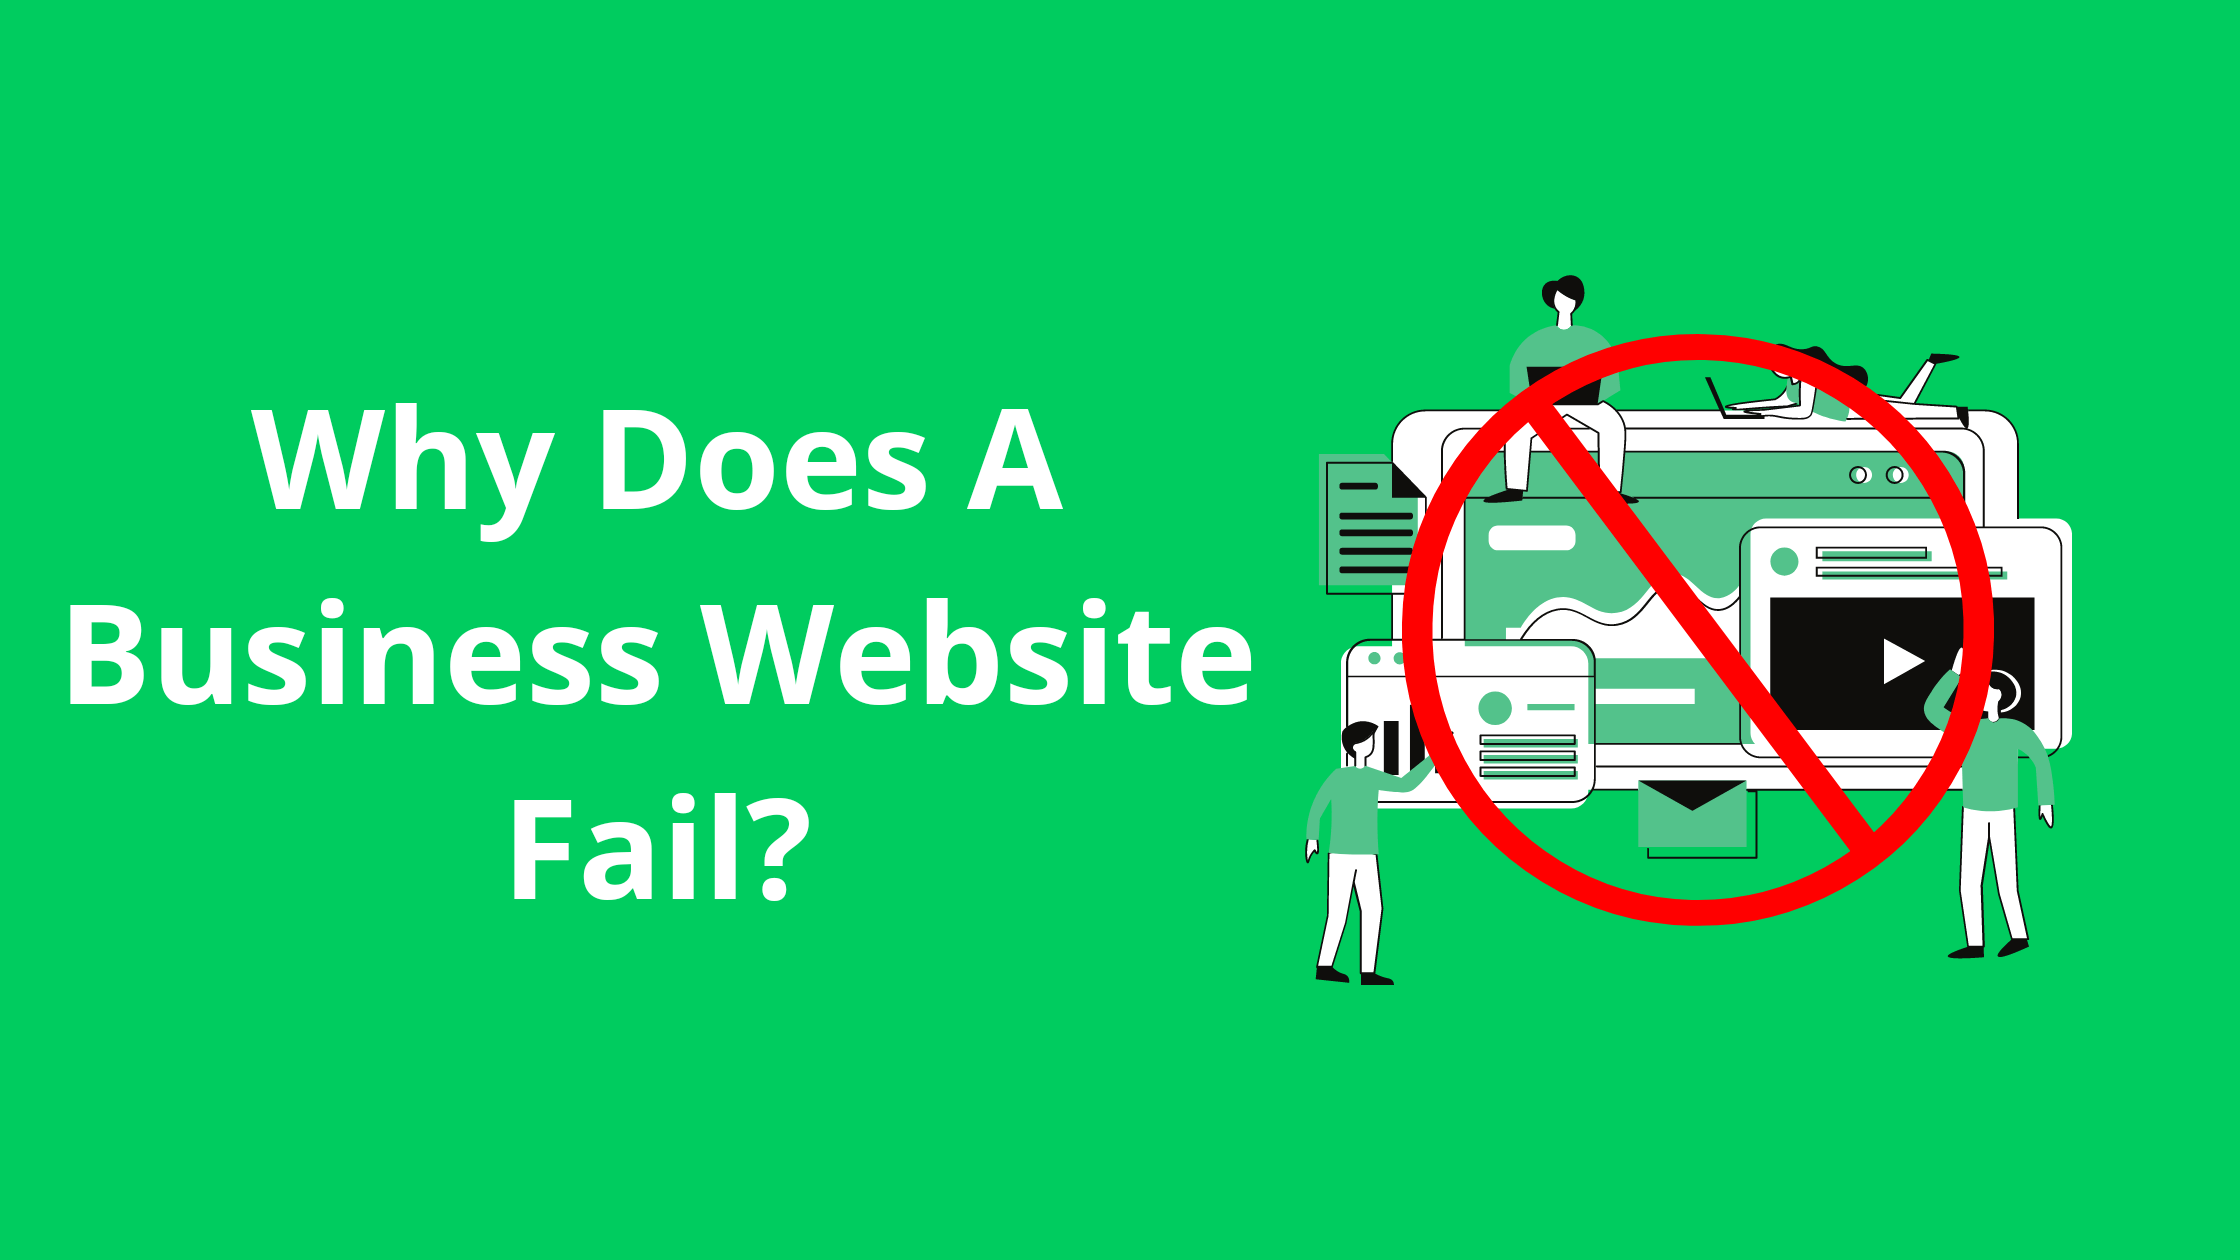 Why Does A Business Website Fail